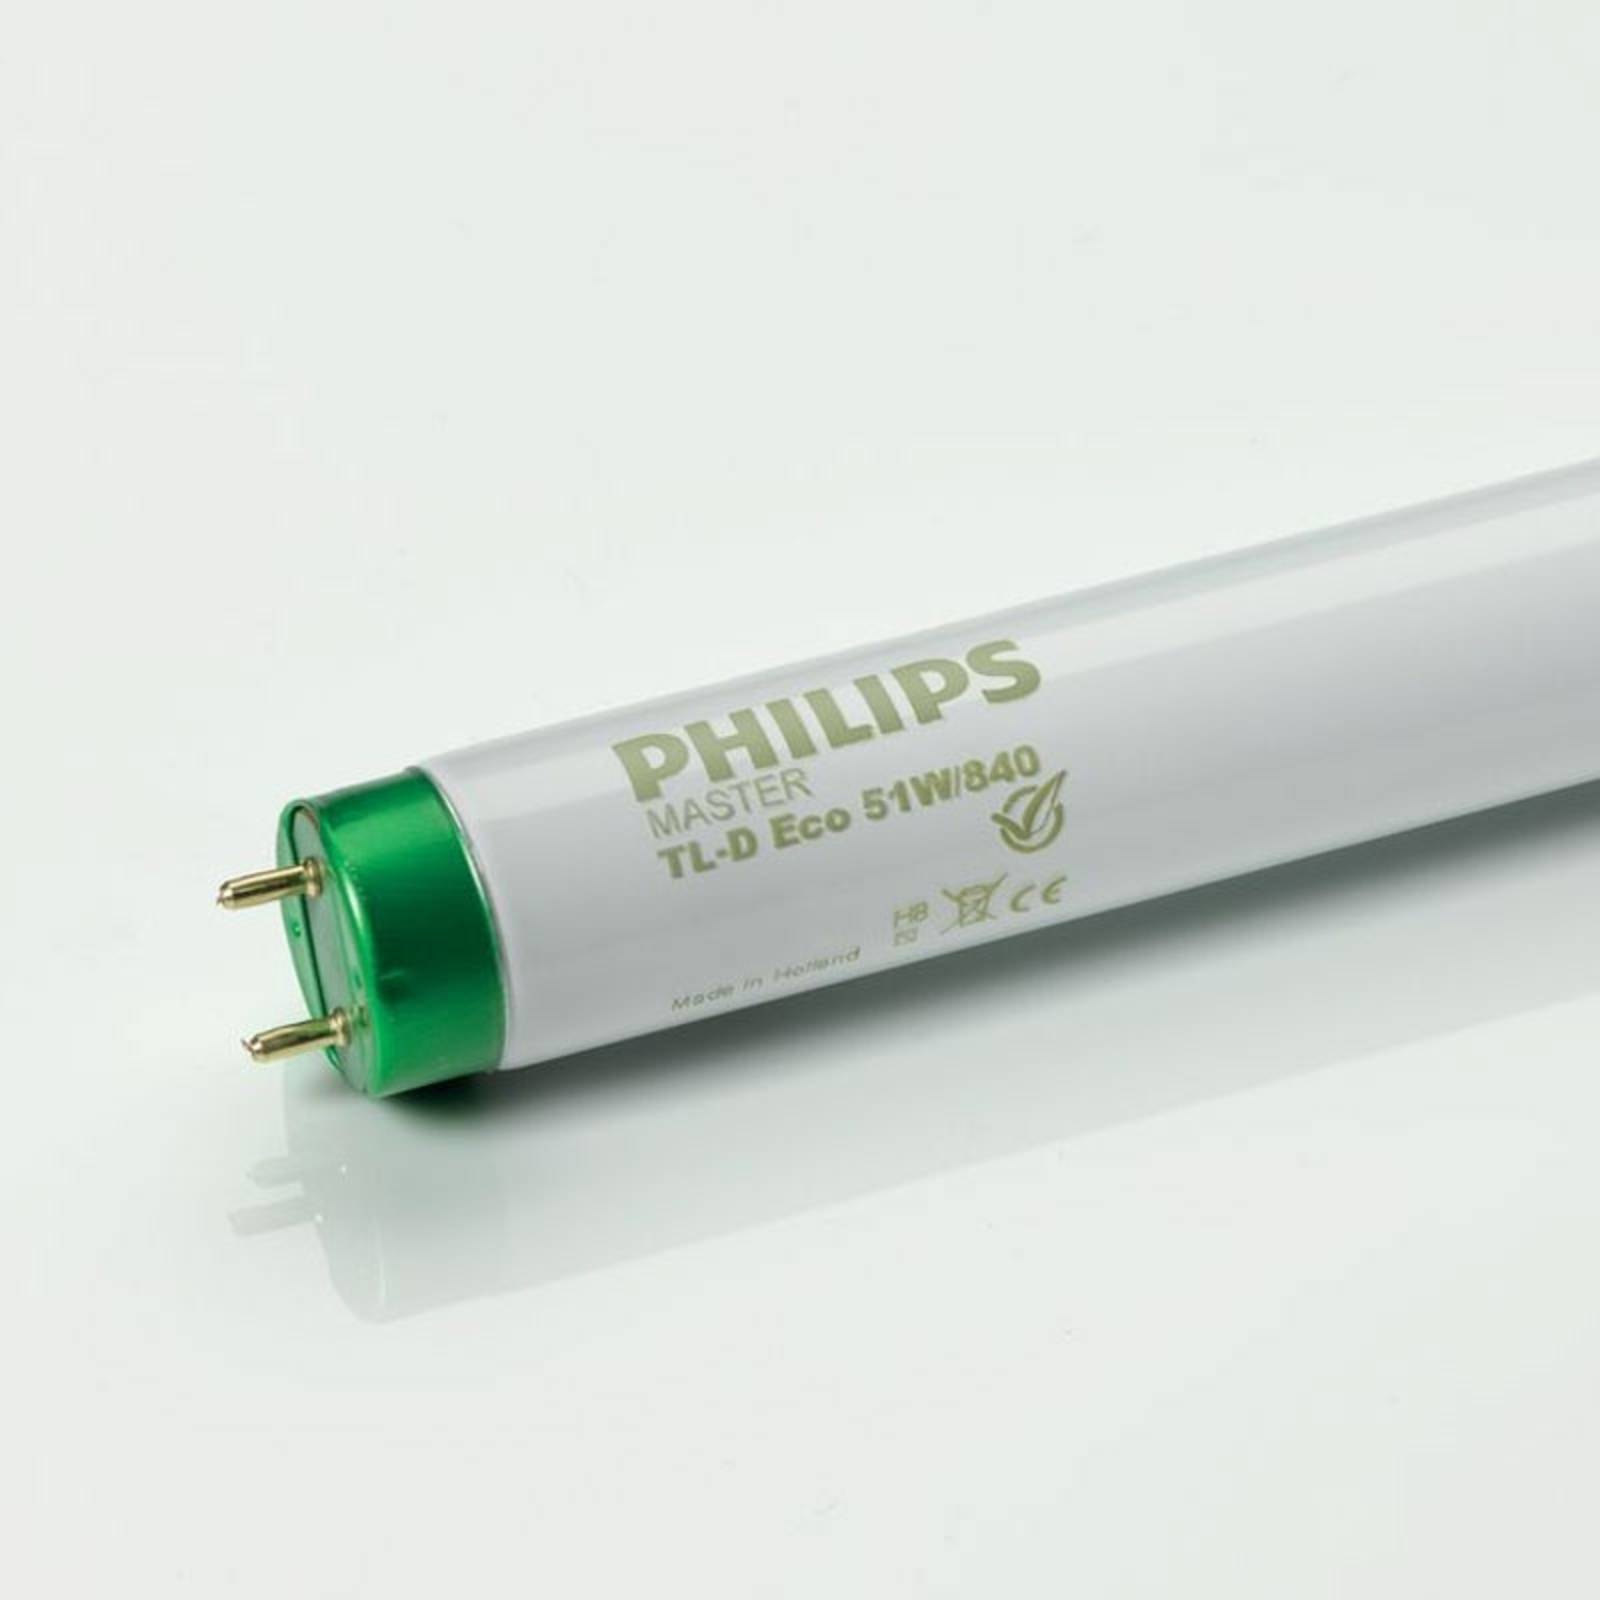 Philips Leuchtstoffröhre G13 T8 Master TL-D Eco 865 32W